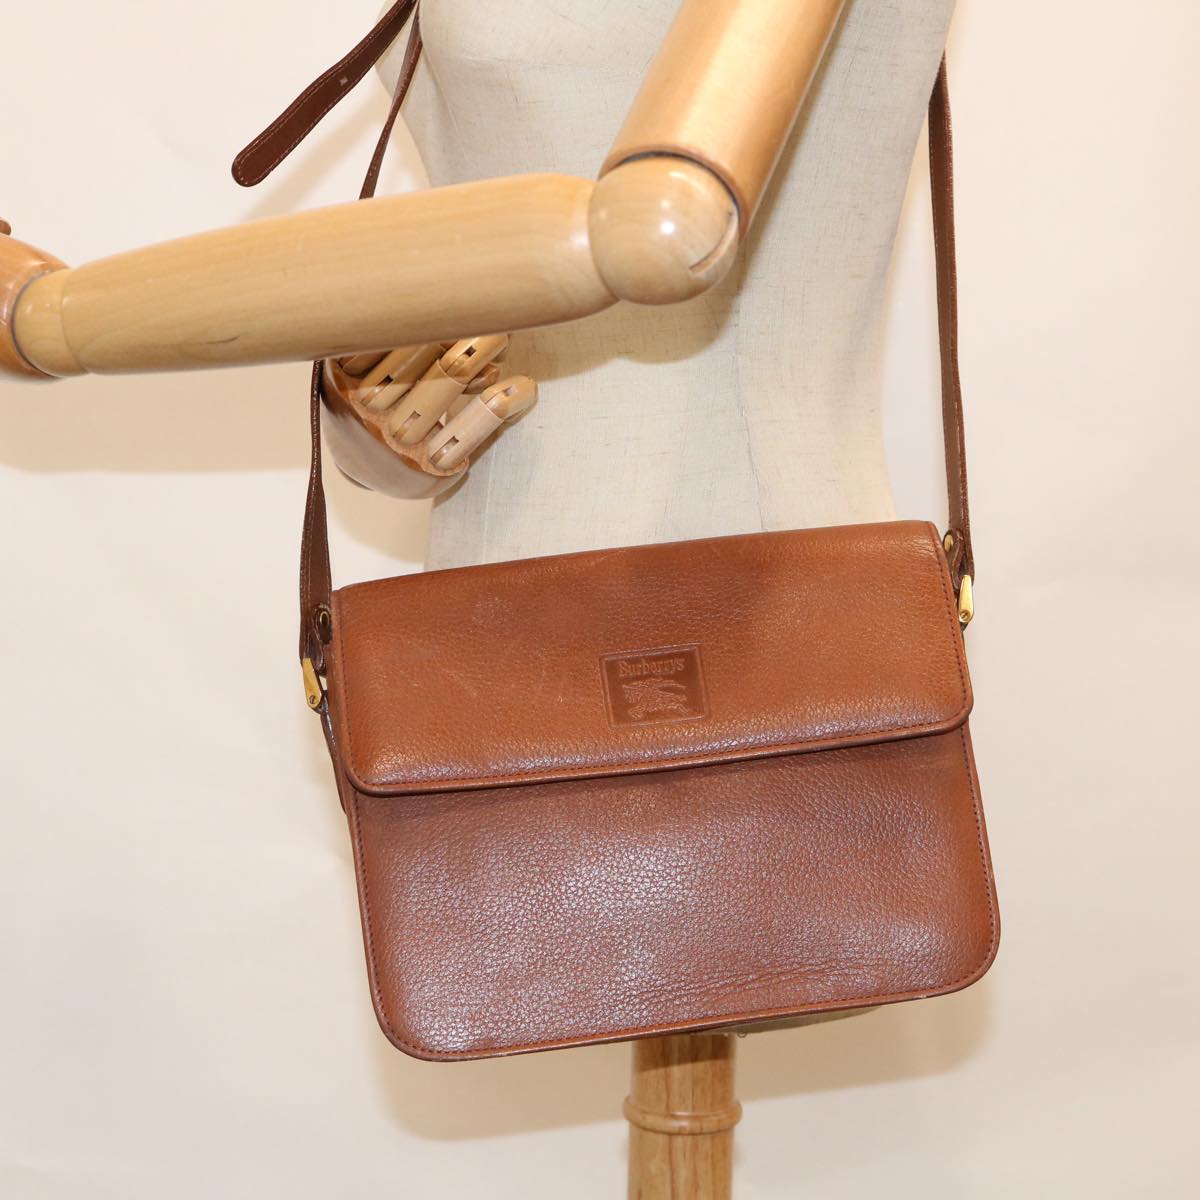 Burberrys Shoulder Bag Leather Brown Auth bs11137